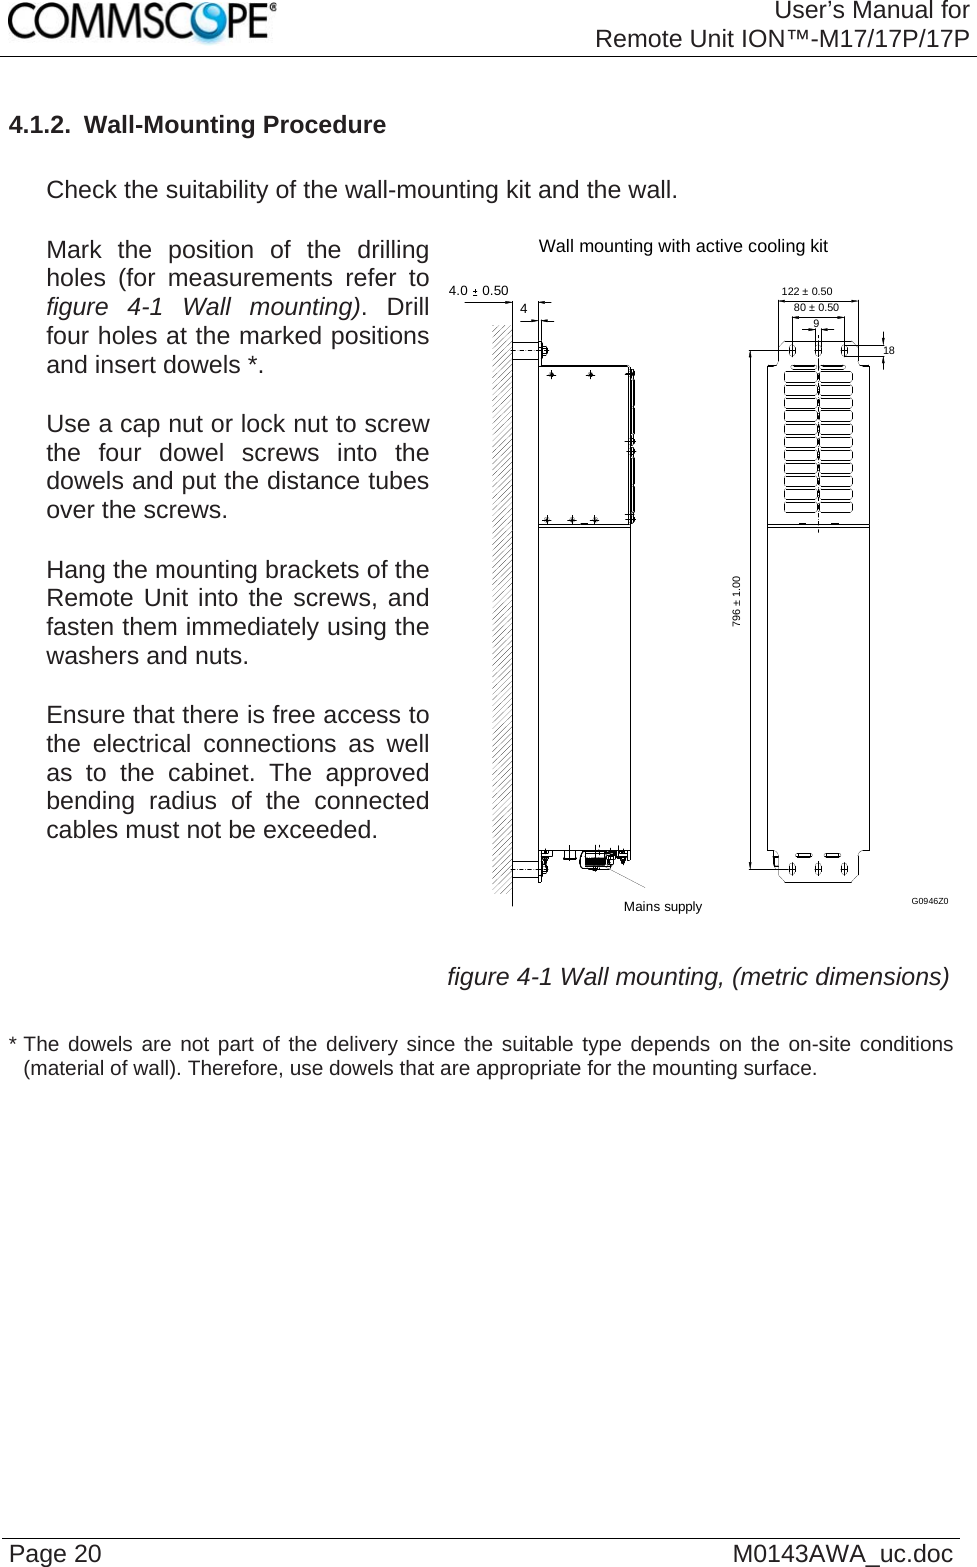 User’s Manual forRemote Unit ION™-M17/17P/17P Page 20  M0143AWA_uc.doc4.1.2.  Wall-Mounting Procedure     Check the suitability of the wall-mounting kit and the wall.     Mark the position of the drilling holes (for measurements refer to figure 4-1 Wall mounting). Drill four holes at the marked positions and insert dowels *.     Use a cap nut or lock nut to screw the four dowel screws into the dowels and put the distance tubes over the screws.     Hang the mounting brackets of the Remote Unit into the screws, and fasten them immediately using the washers and nuts.     Ensure that there is free access to the electrical connections as well as to the cabinet. The approved bending radius of the connected cables must not be exceeded.   Wall mounting with active cooling kit4.0  0.504Mains supply980 ± 0.50122 ± 0.5018796 ± 1.00G0946Z0 figure 4-1 Wall mounting, (metric dimensions) * The dowels are not part of the delivery since the suitable type depends on the on-site conditions (material of wall). Therefore, use dowels that are appropriate for the mounting surface.   